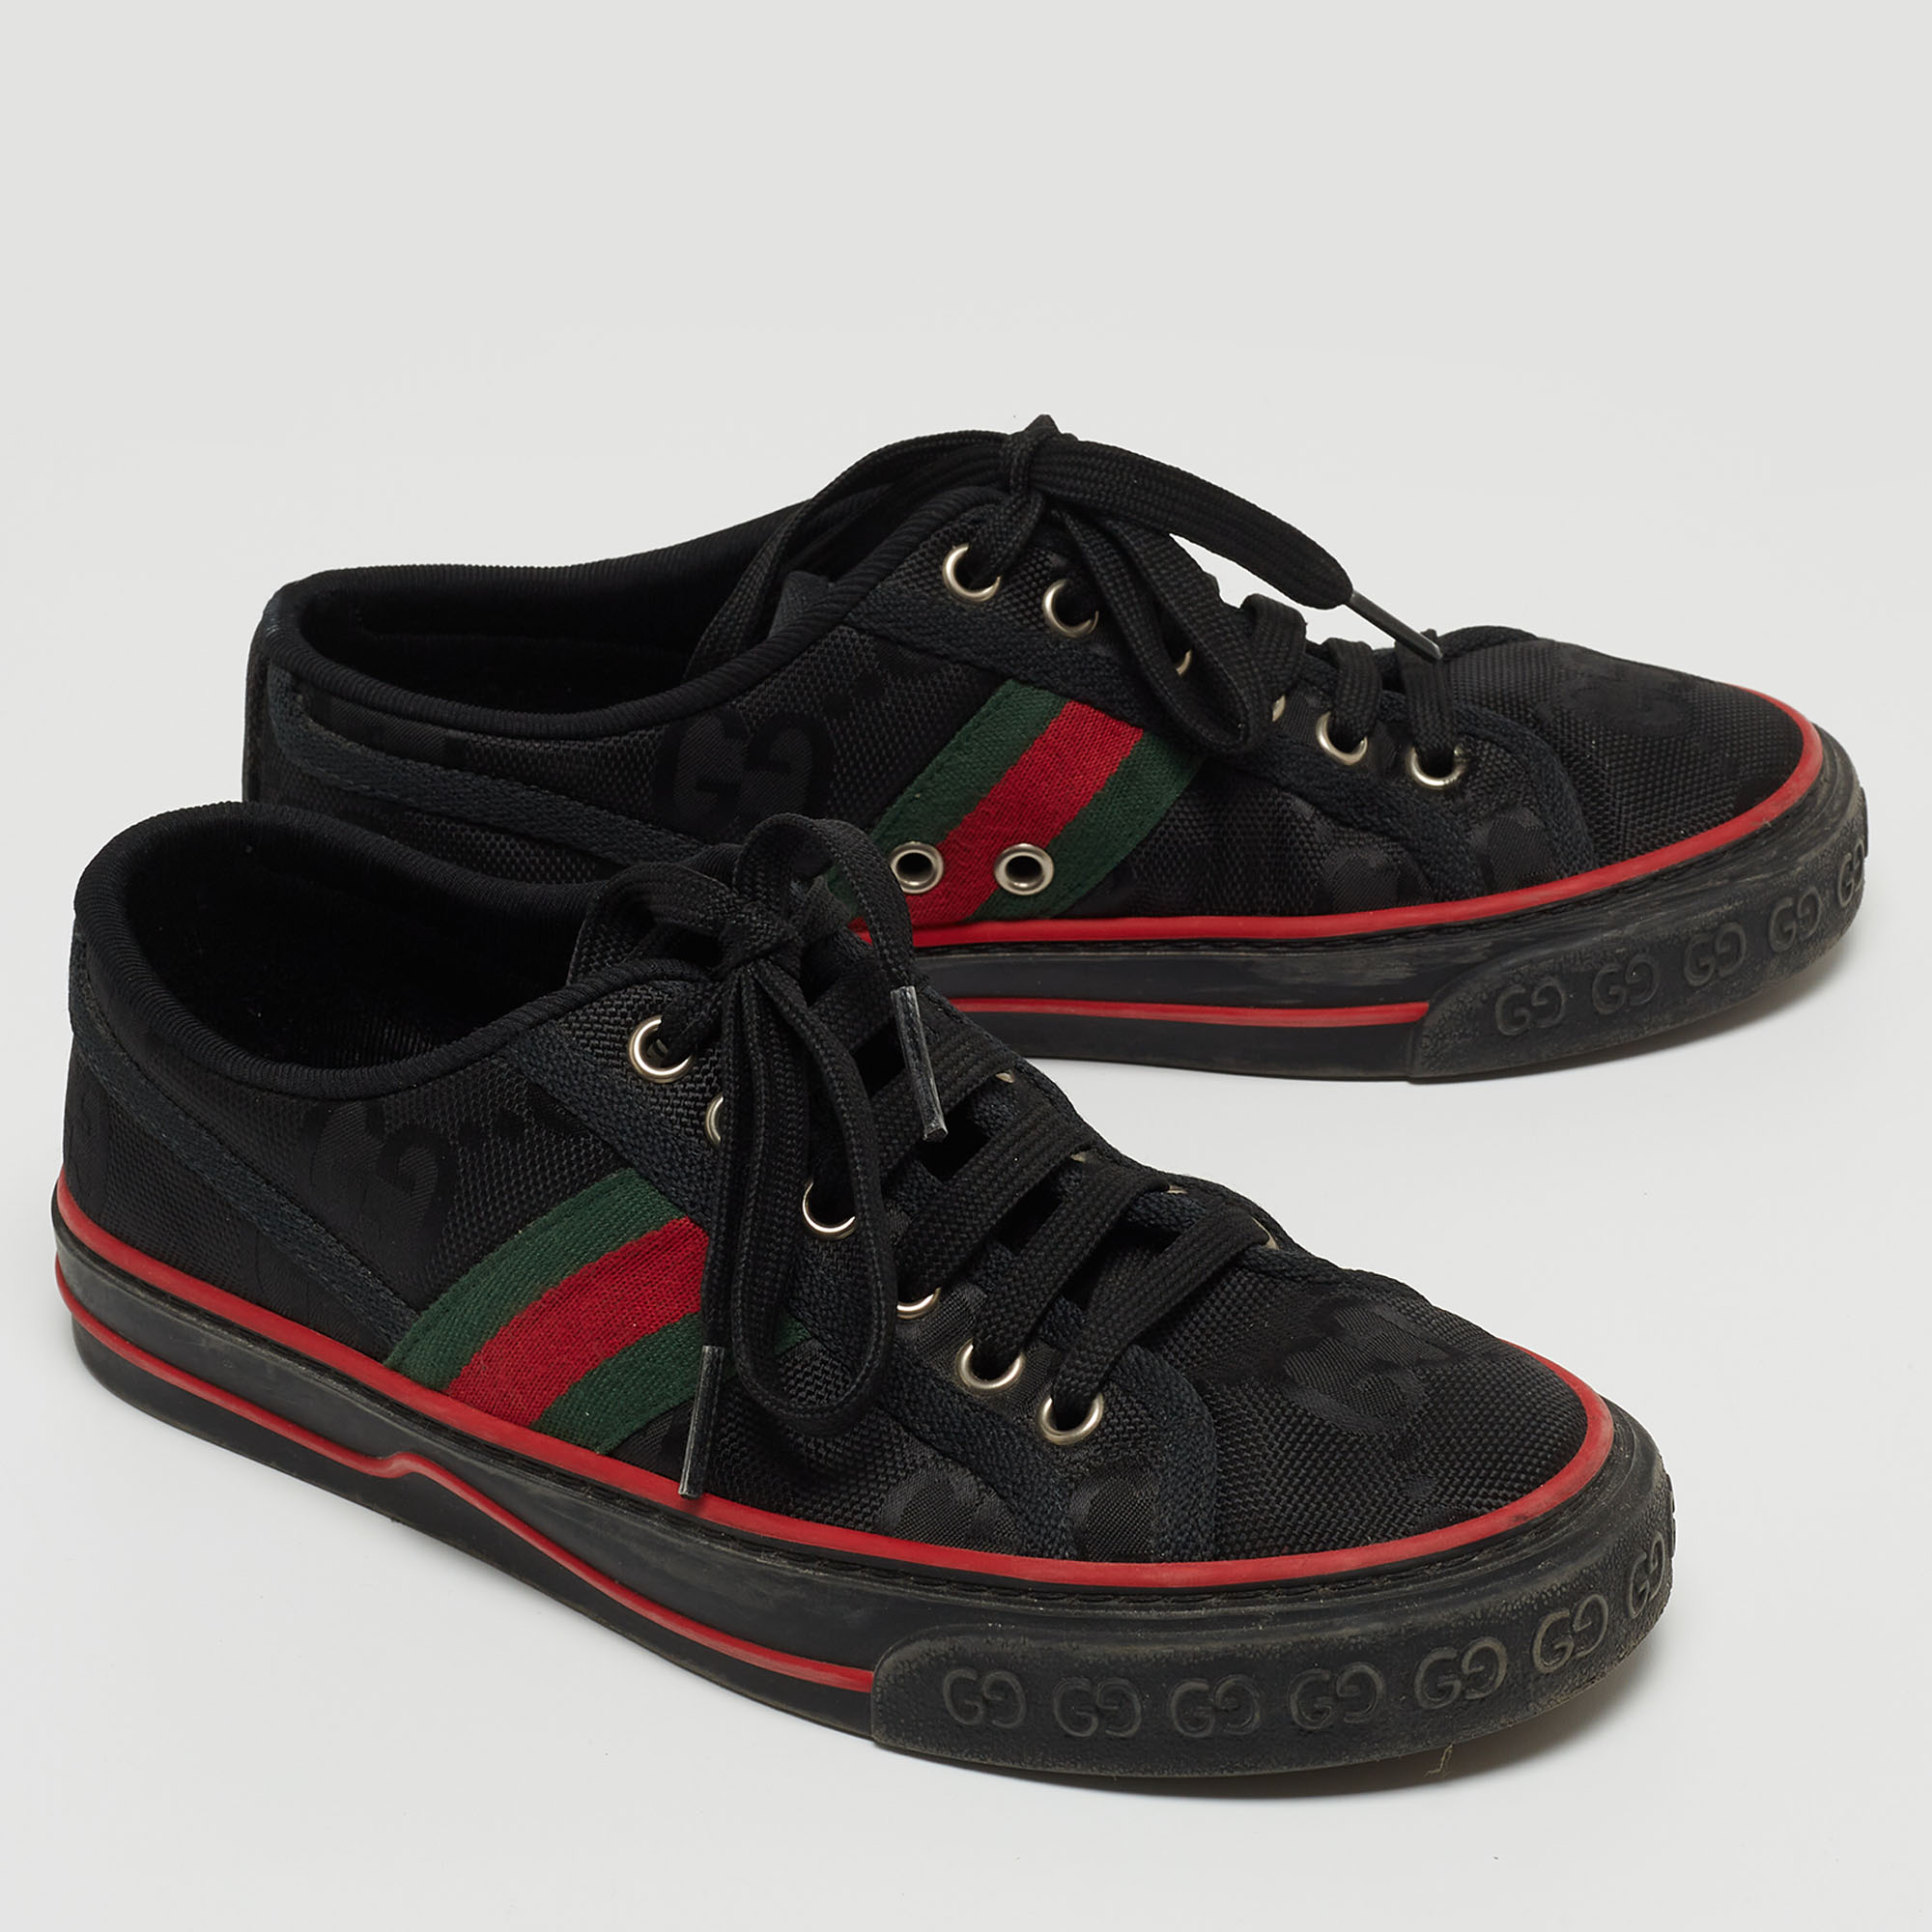 Gucci Black GG Canvas Tennis 1977 Sneakers Size 36